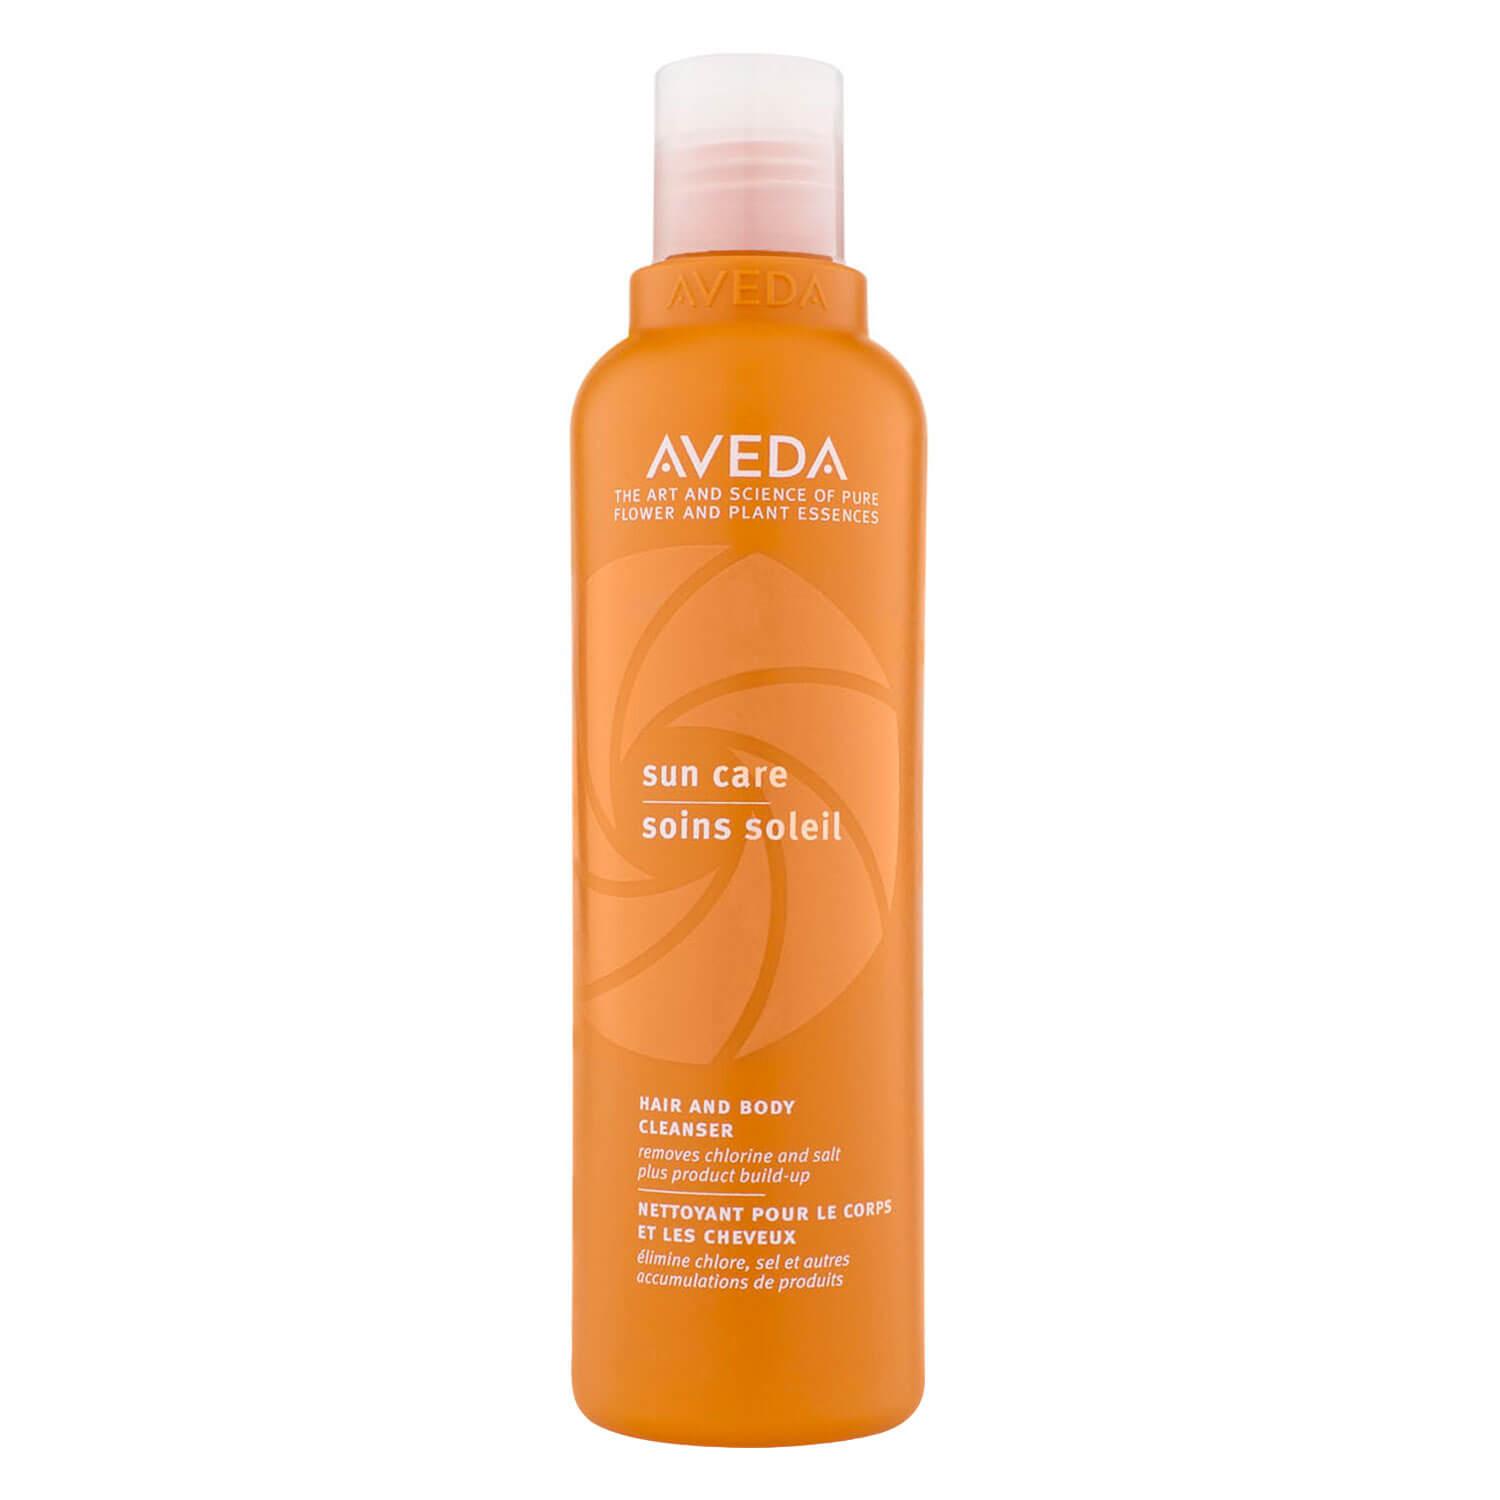 aveda sun care - hair and body cleanser